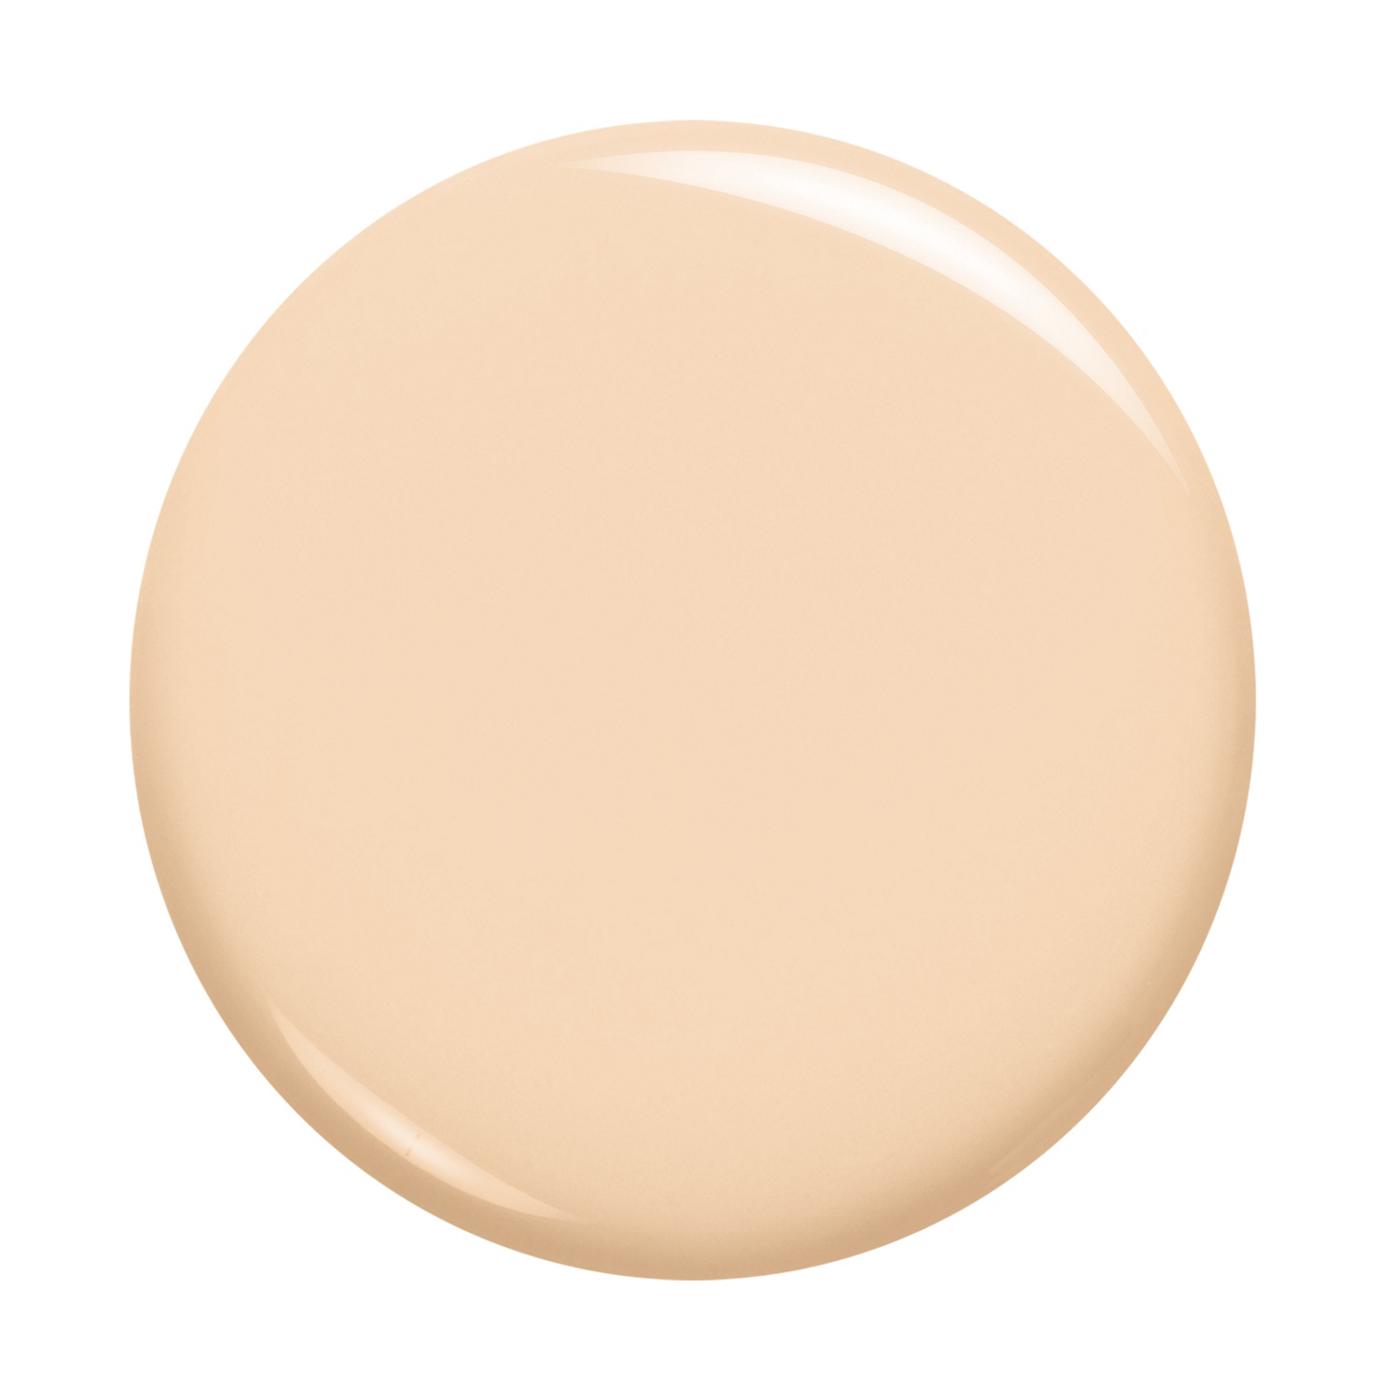 L'Oréal Paris Infallible Up to 24 Hour Fresh Wear Foundation - Lightweight Beige Ivory; image 7 of 7